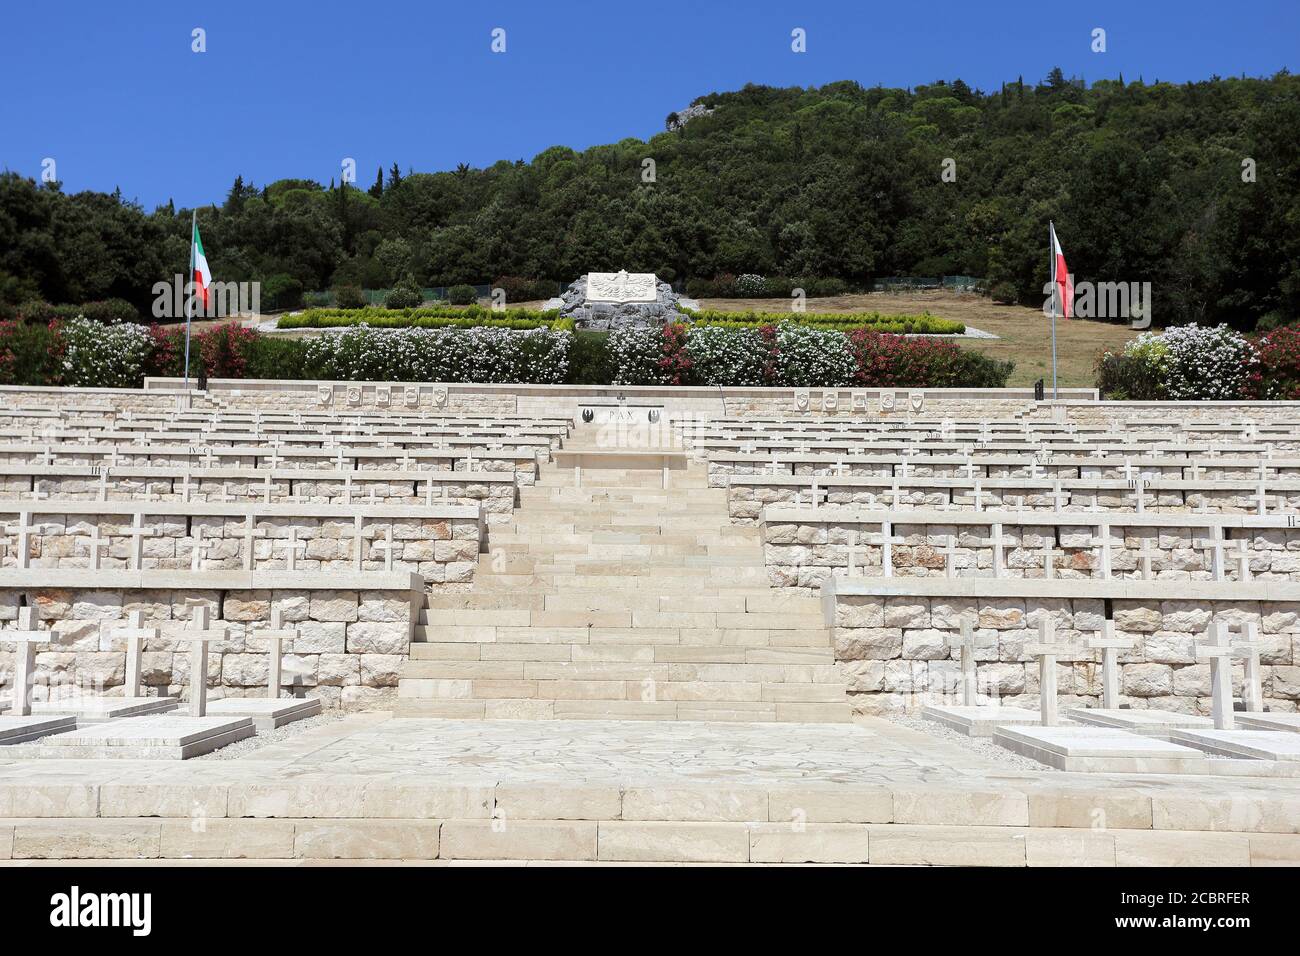 Cassino, Italy - August 14, 2020: The Polish military cemetery of Montecassino where more than a thousand soldiers of the second Polish army corps are Stock Photo